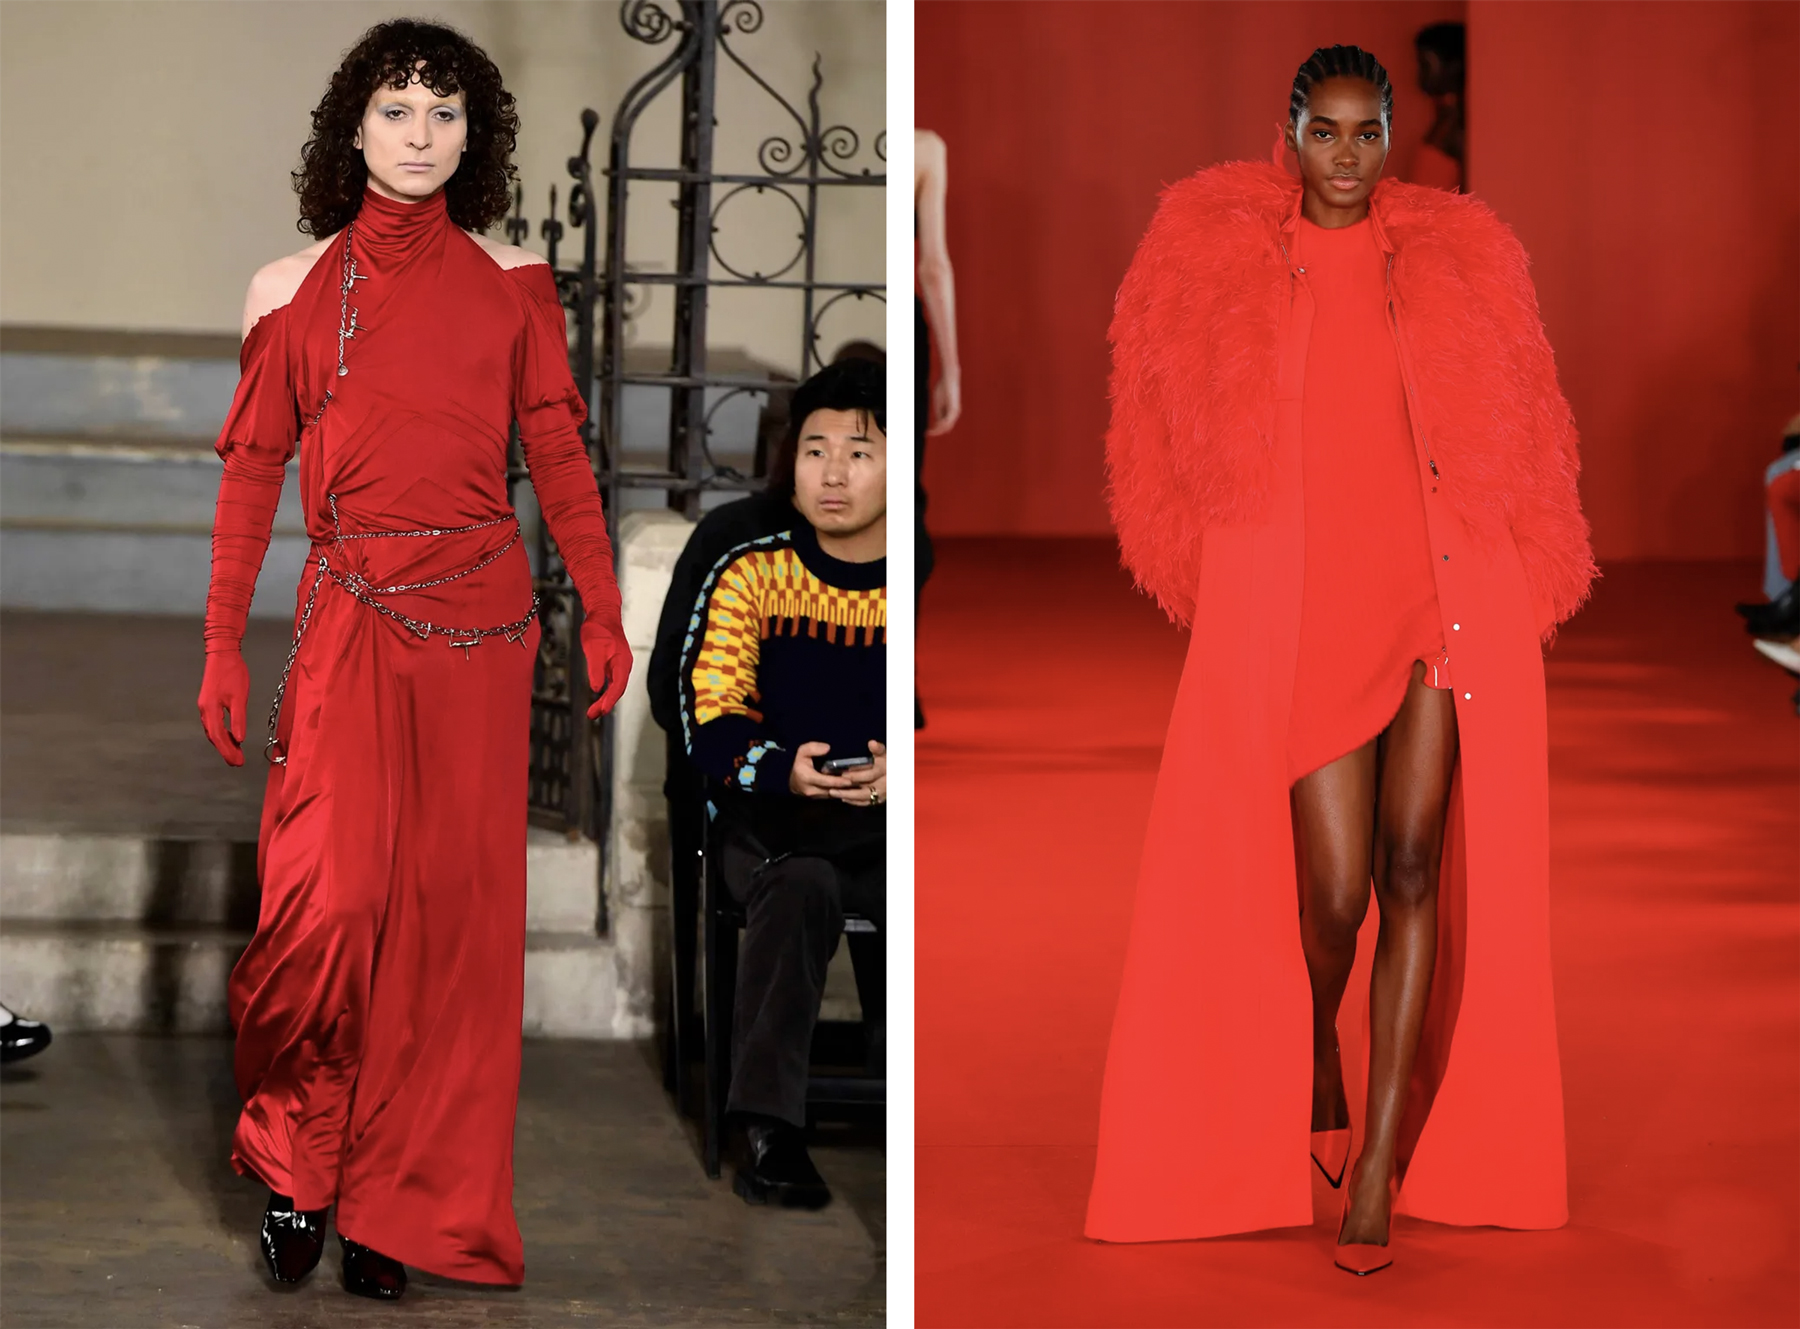 Some cult pieces from the FW23 London shows. On the left, a creation by Dilara Findikoglu; on the right, an ensemble by David Koma